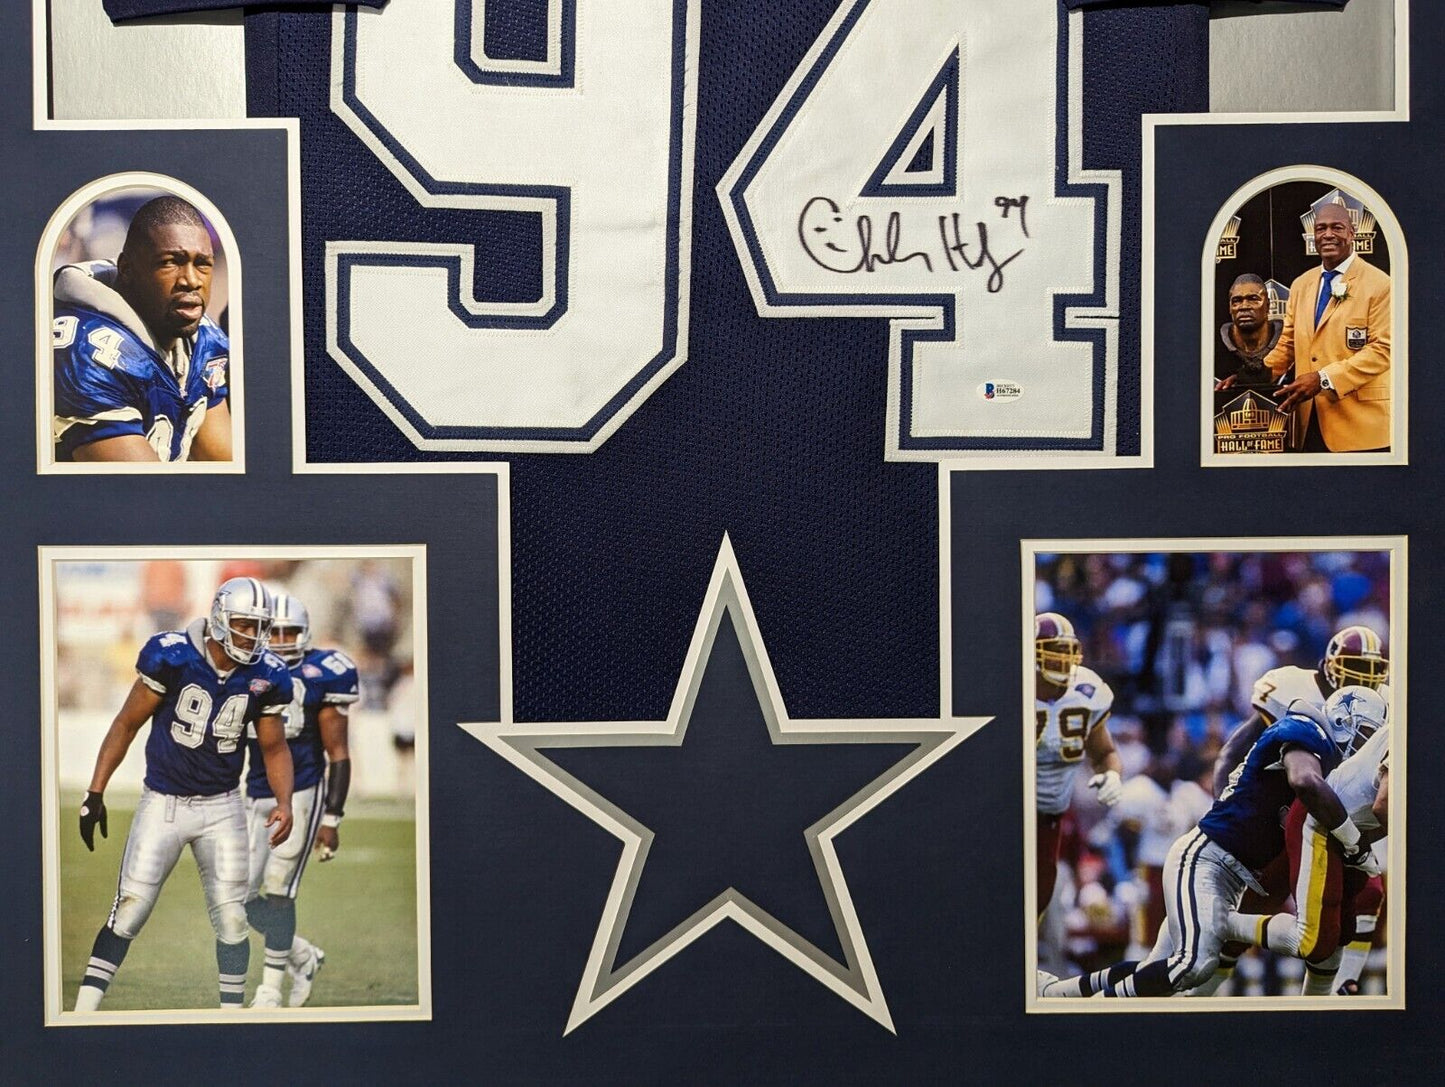 MVP Authentics Framed Dallas Cowboys Charles Haley Autographed Signed Jersey Beckett Coa 382.50 sports jersey framing , jersey framing